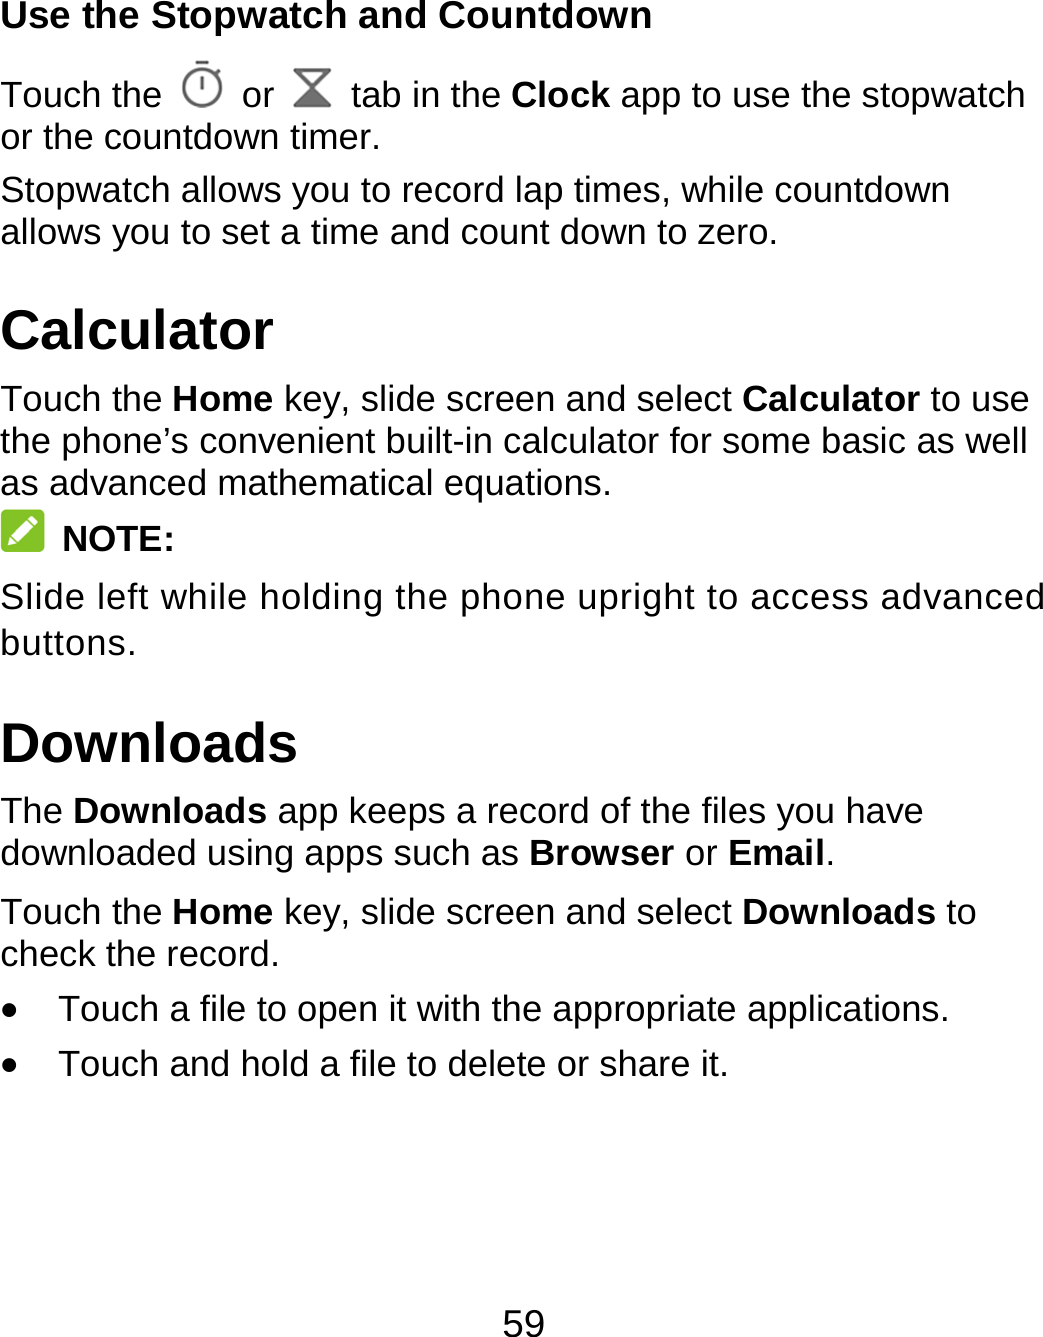 59 Use the Stopwatch and Countdown Touch the   or    tab in the Clock app to use the stopwatch or the countdown timer. Stopwatch allows you to record lap times, while countdown allows you to set a time and count down to zero. Calculator Touch the Home key, slide screen and select Calculator to use the phone’s convenient built-in calculator for some basic as well as advanced mathematical equations.  NOTE: Slide left while holding the phone upright to access advanced buttons. Downloads The Downloads app keeps a record of the files you have downloaded using apps such as Browser or Email. Touch the Home key, slide screen and select Downloads to check the record.  Touch a file to open it with the appropriate applications.  Touch and hold a file to delete or share it. 